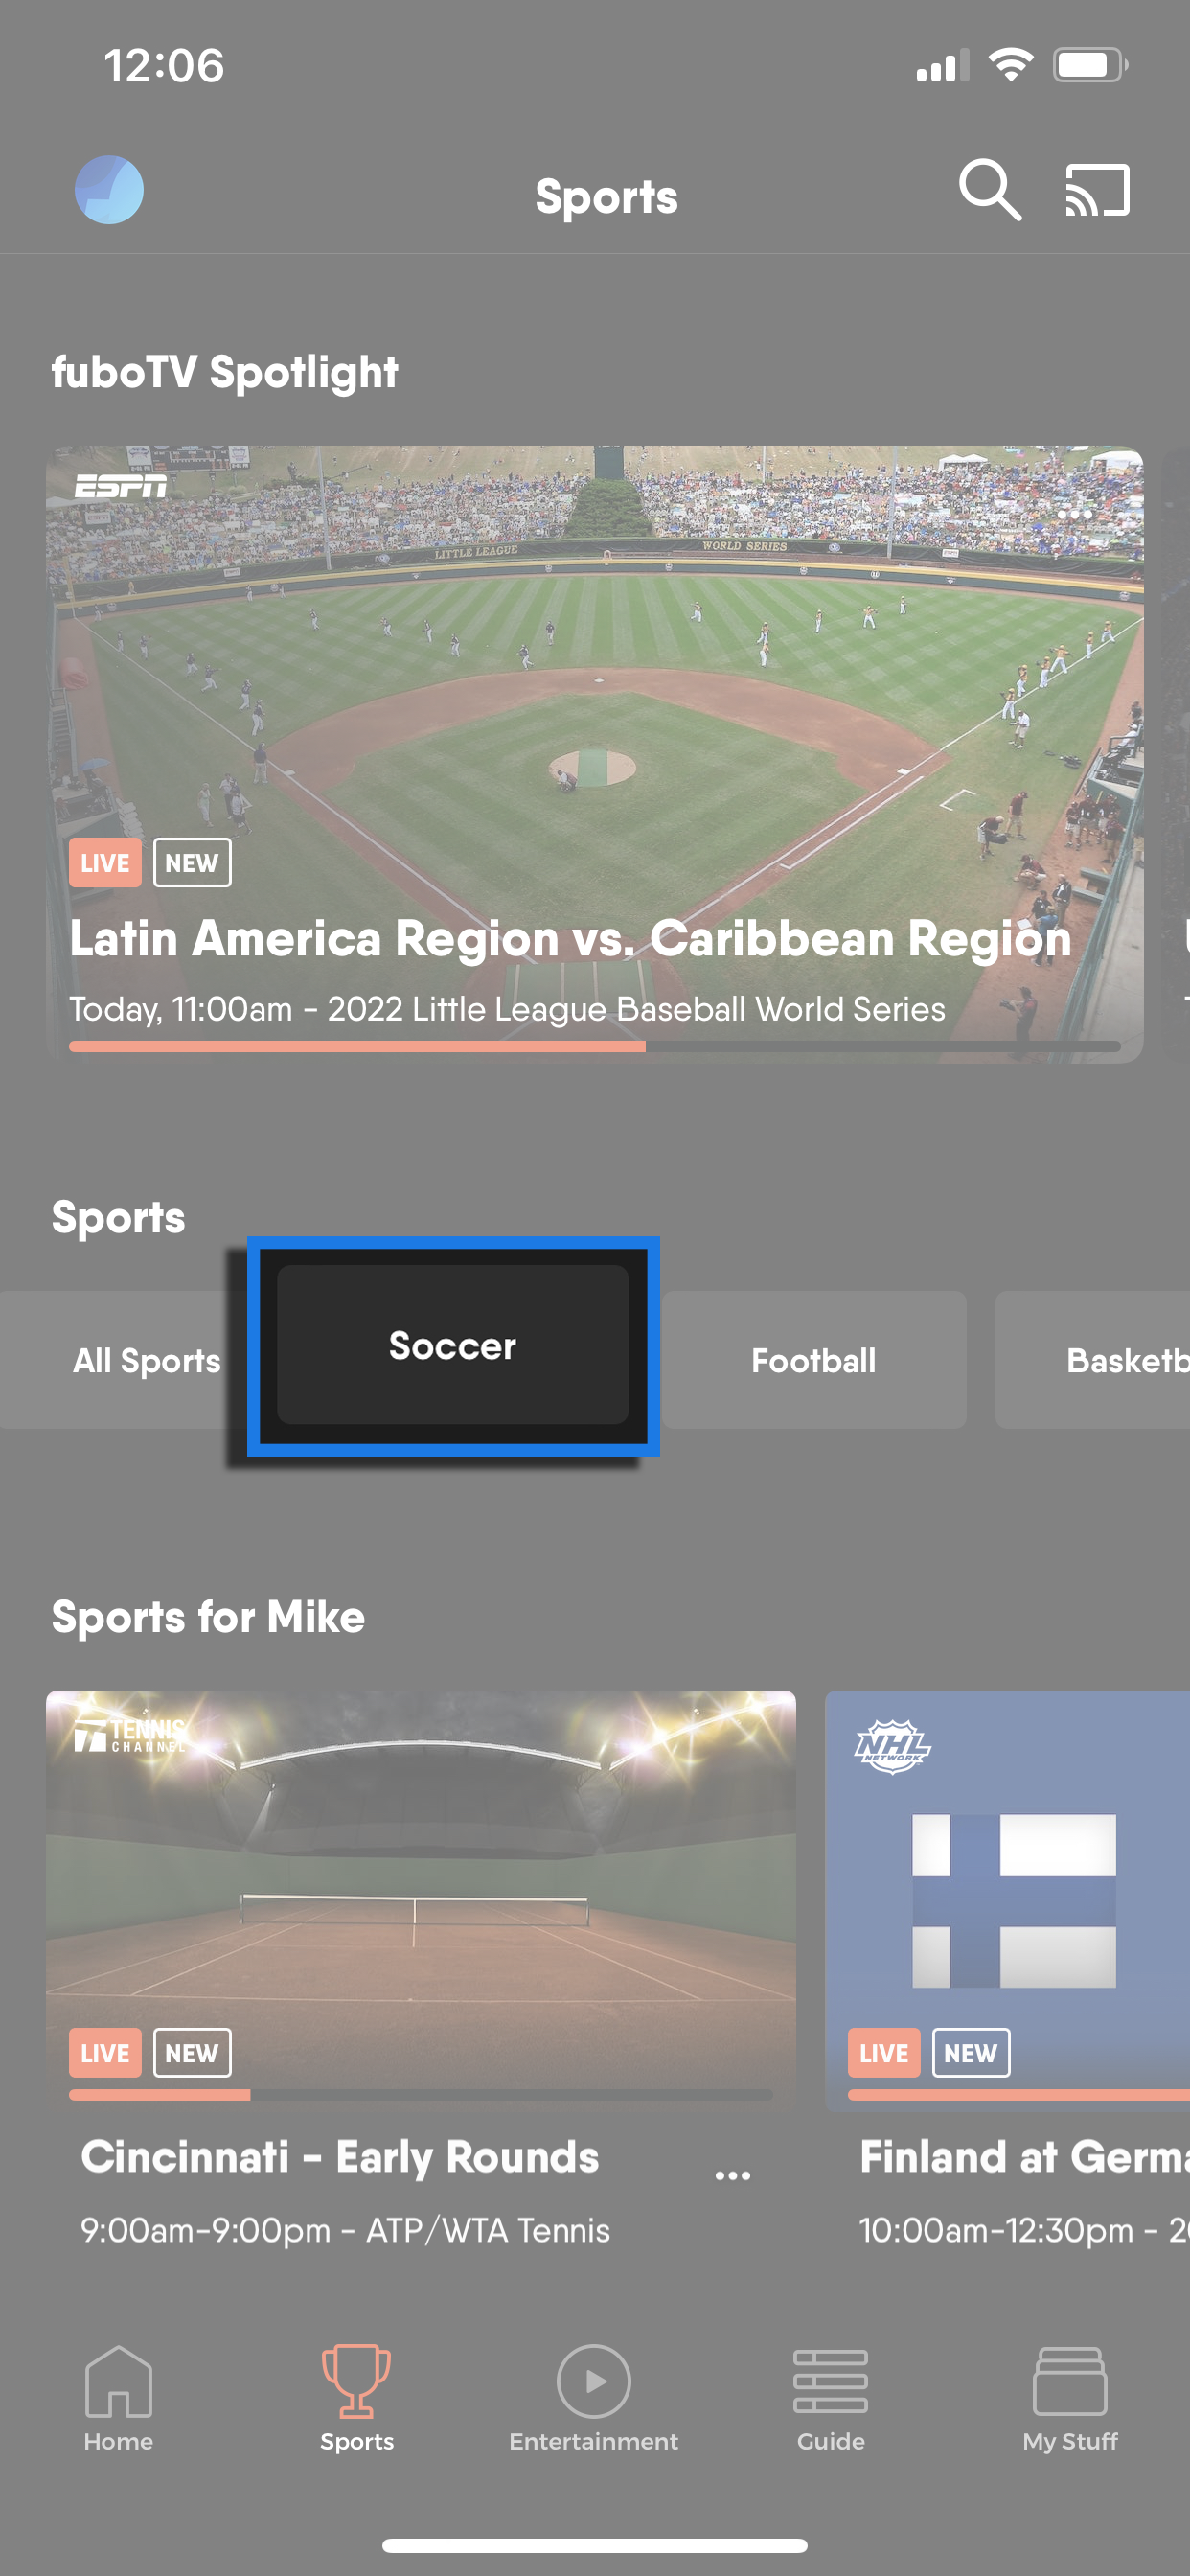 Sports screen of the FuboTV app on a mobile device with the SOCCER filter highlighted